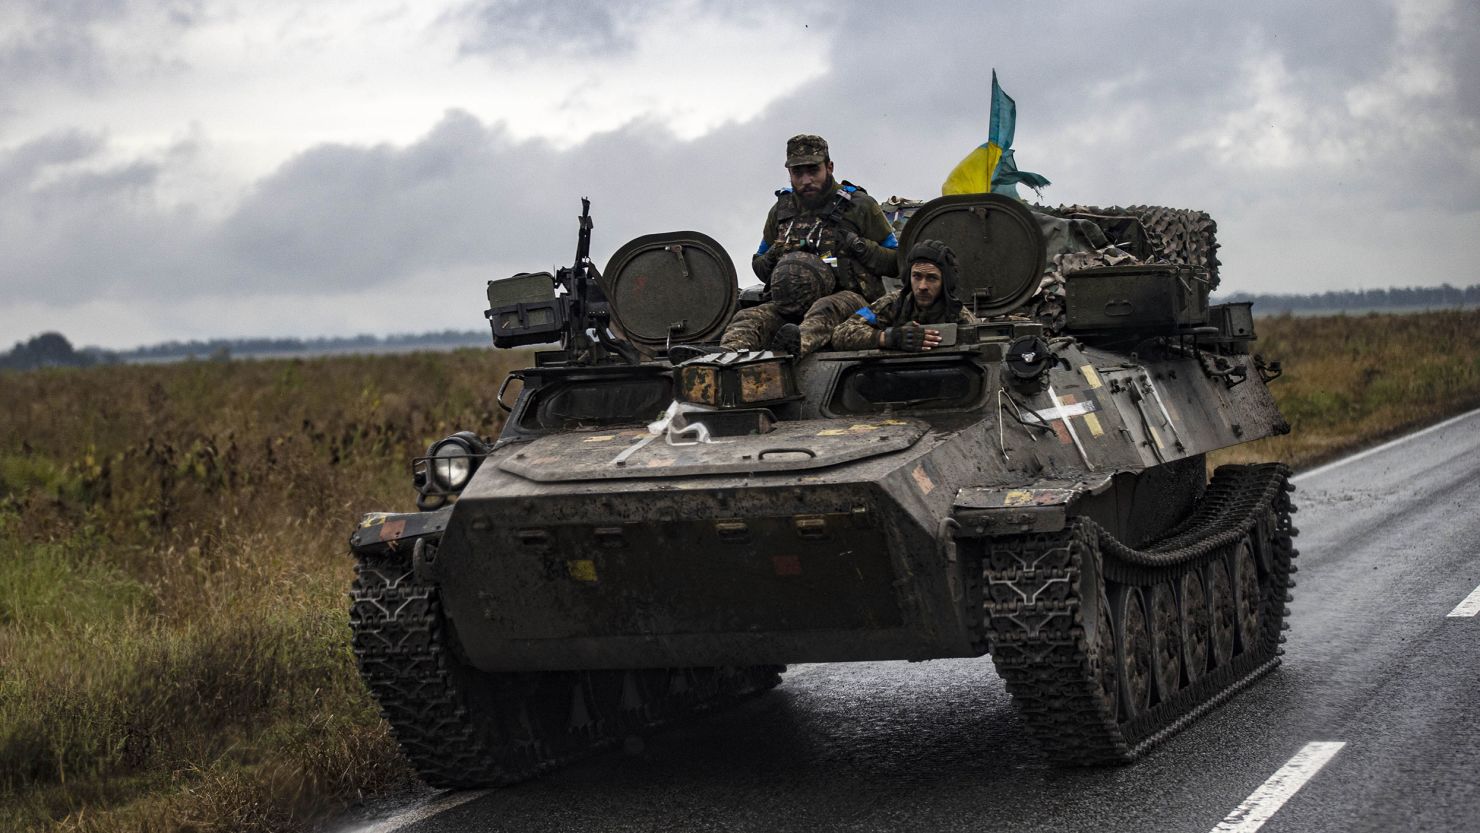 Ukrainian soldiers are seen in a tank after Russian Forces withdrawal as Russia-Ukraine war continues in Izium, Kharkiv Oblast, Ukraine on September 14, 2022. 